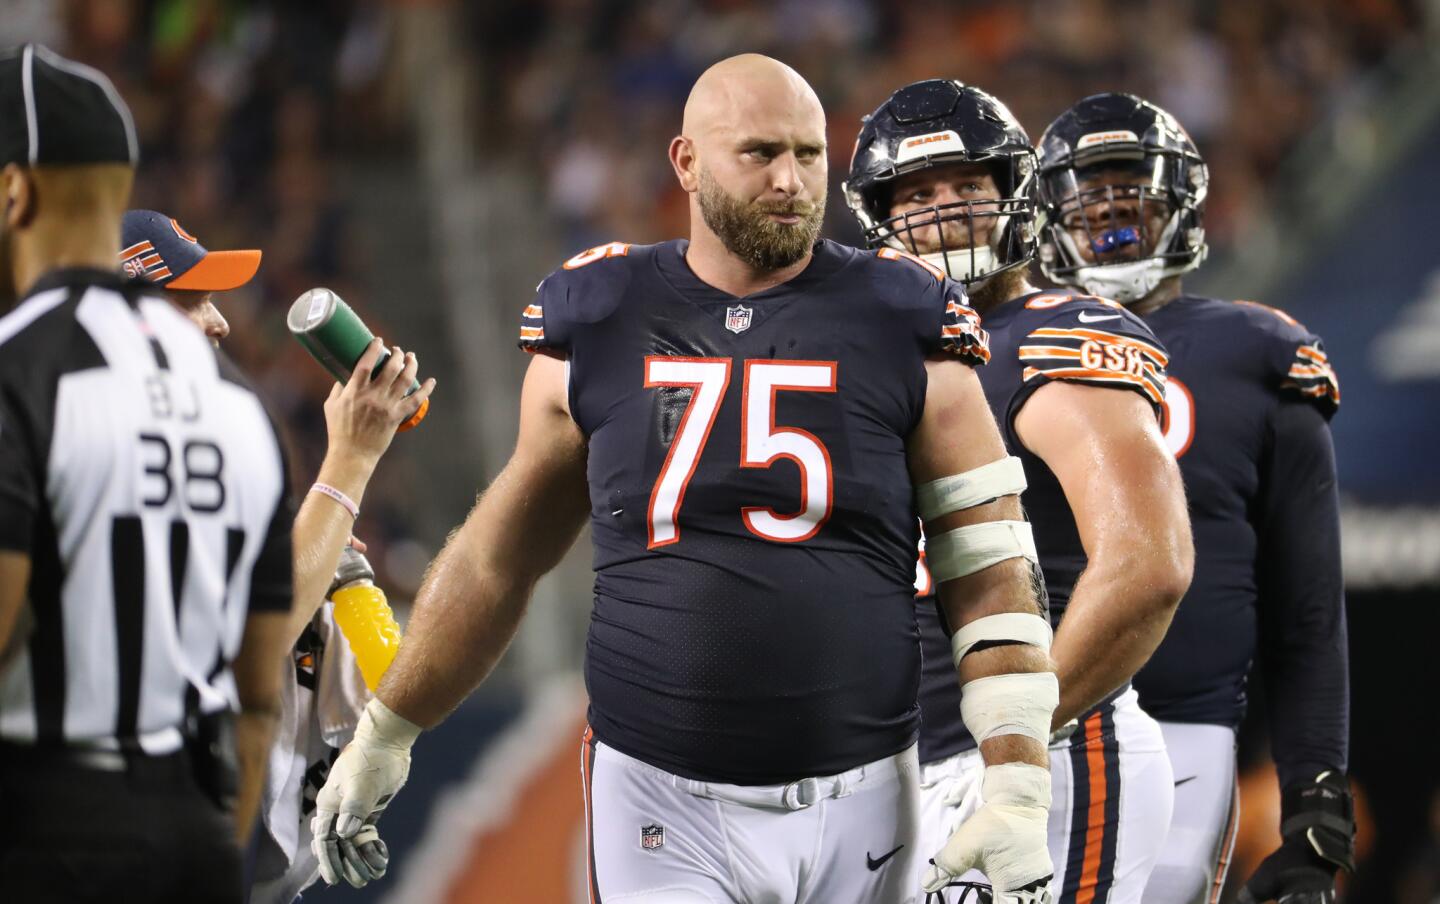 Bears offensive guard Kyle Long (75) takes a water break in the second quarter against the Seahawks at Soldier Field on Monday, Sept. 17, 2018.